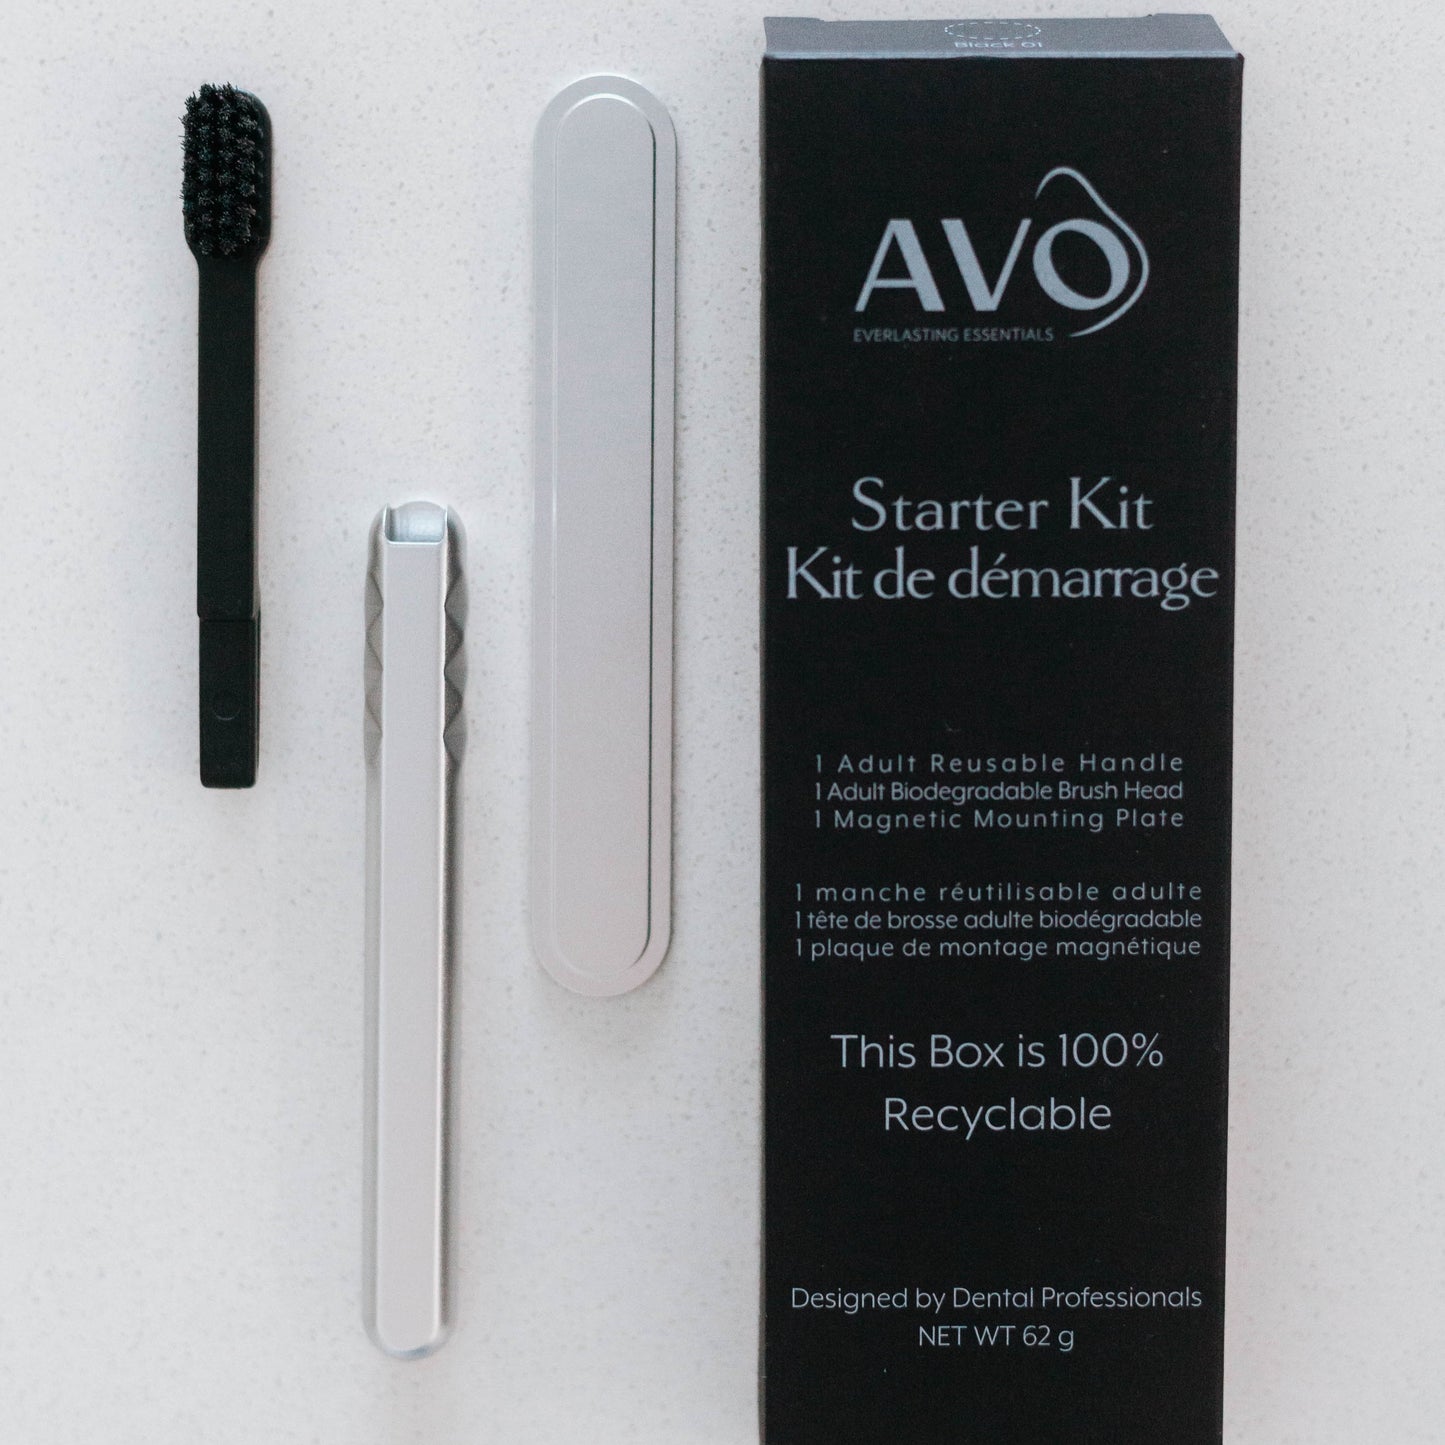 Starter Kit Silver Aluminum Brush Handle and Biodegradable Brush presented with Magnetic Strip and Packaging